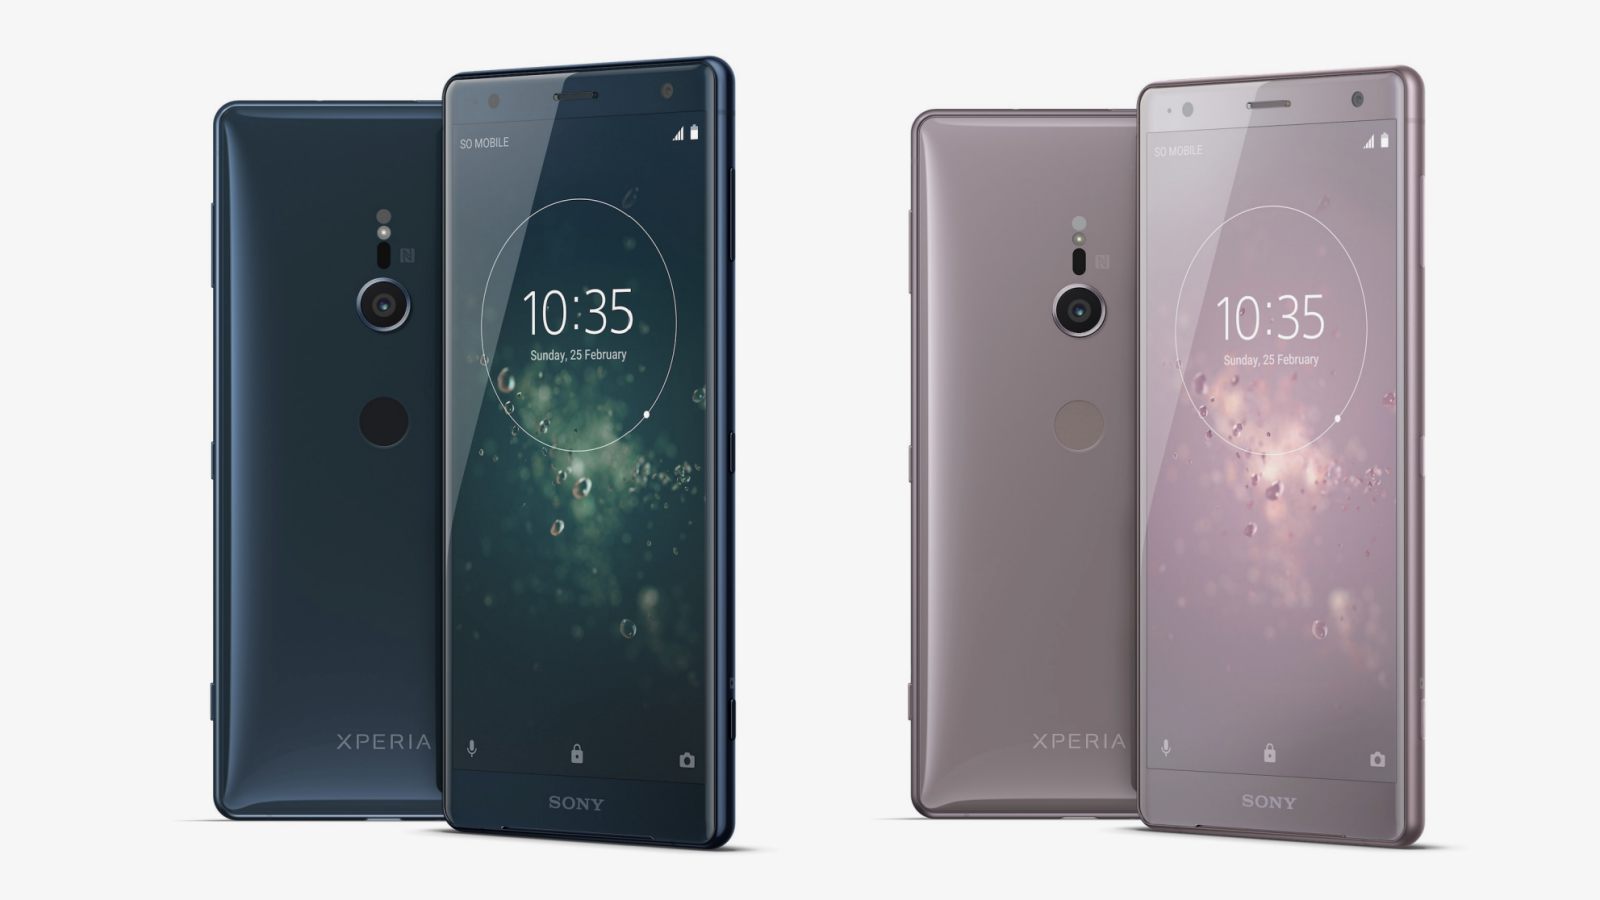 Sony explained why they removed the 3.5 mm audio connector in Xperia XZ2